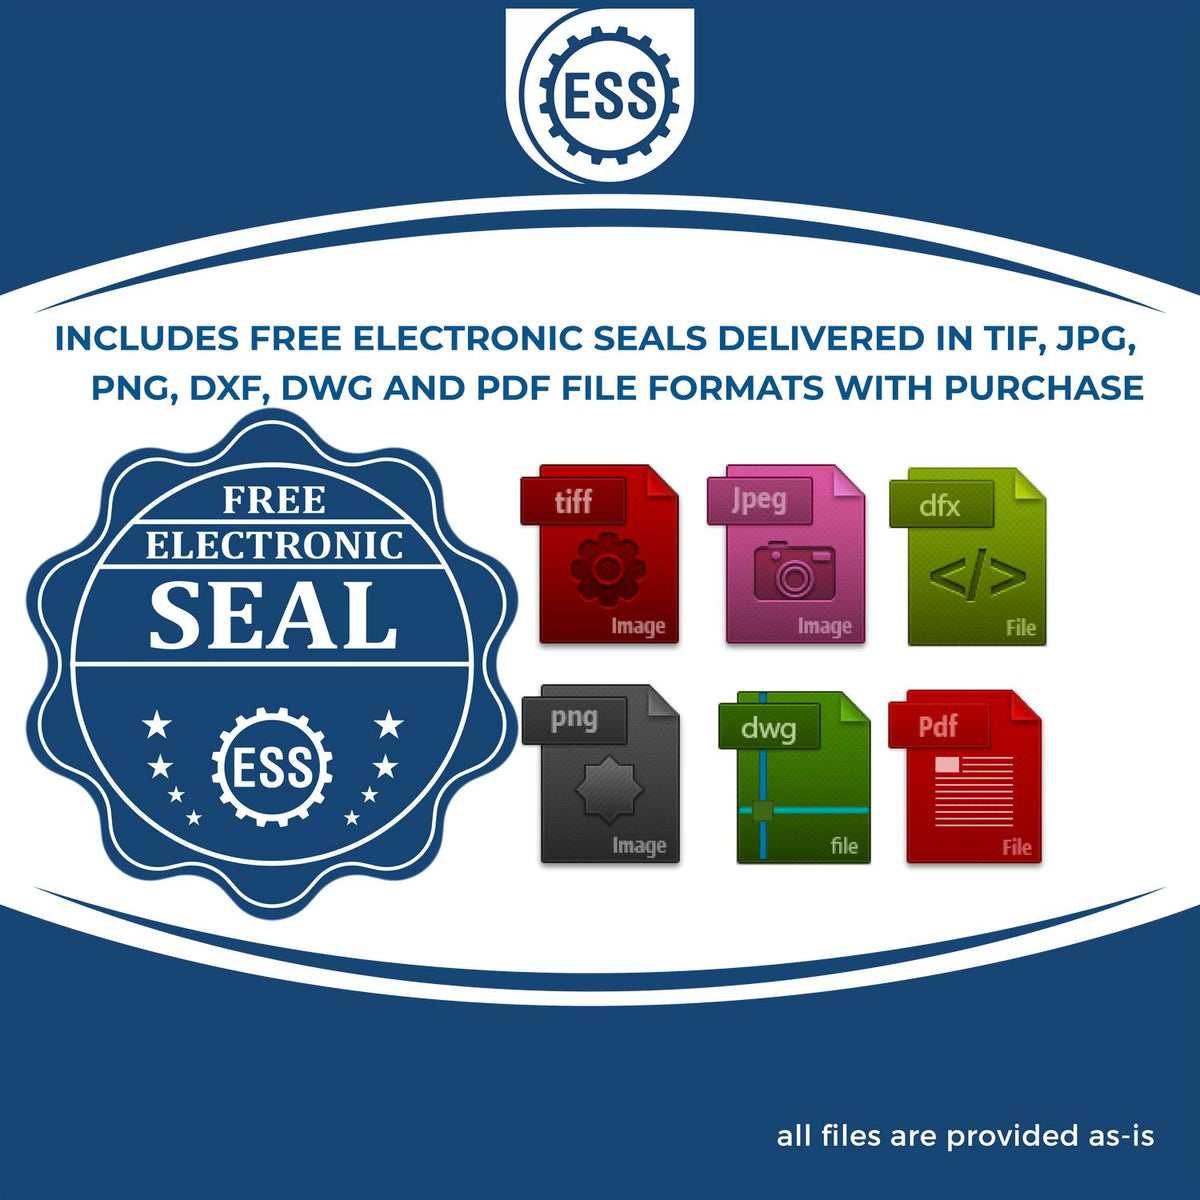 An infographic for the free electronic seal for the Nebraska Professional Engineer Seal Stamp illustrating the different file type icons such as DXF, DWG, TIF, JPG and PNG.